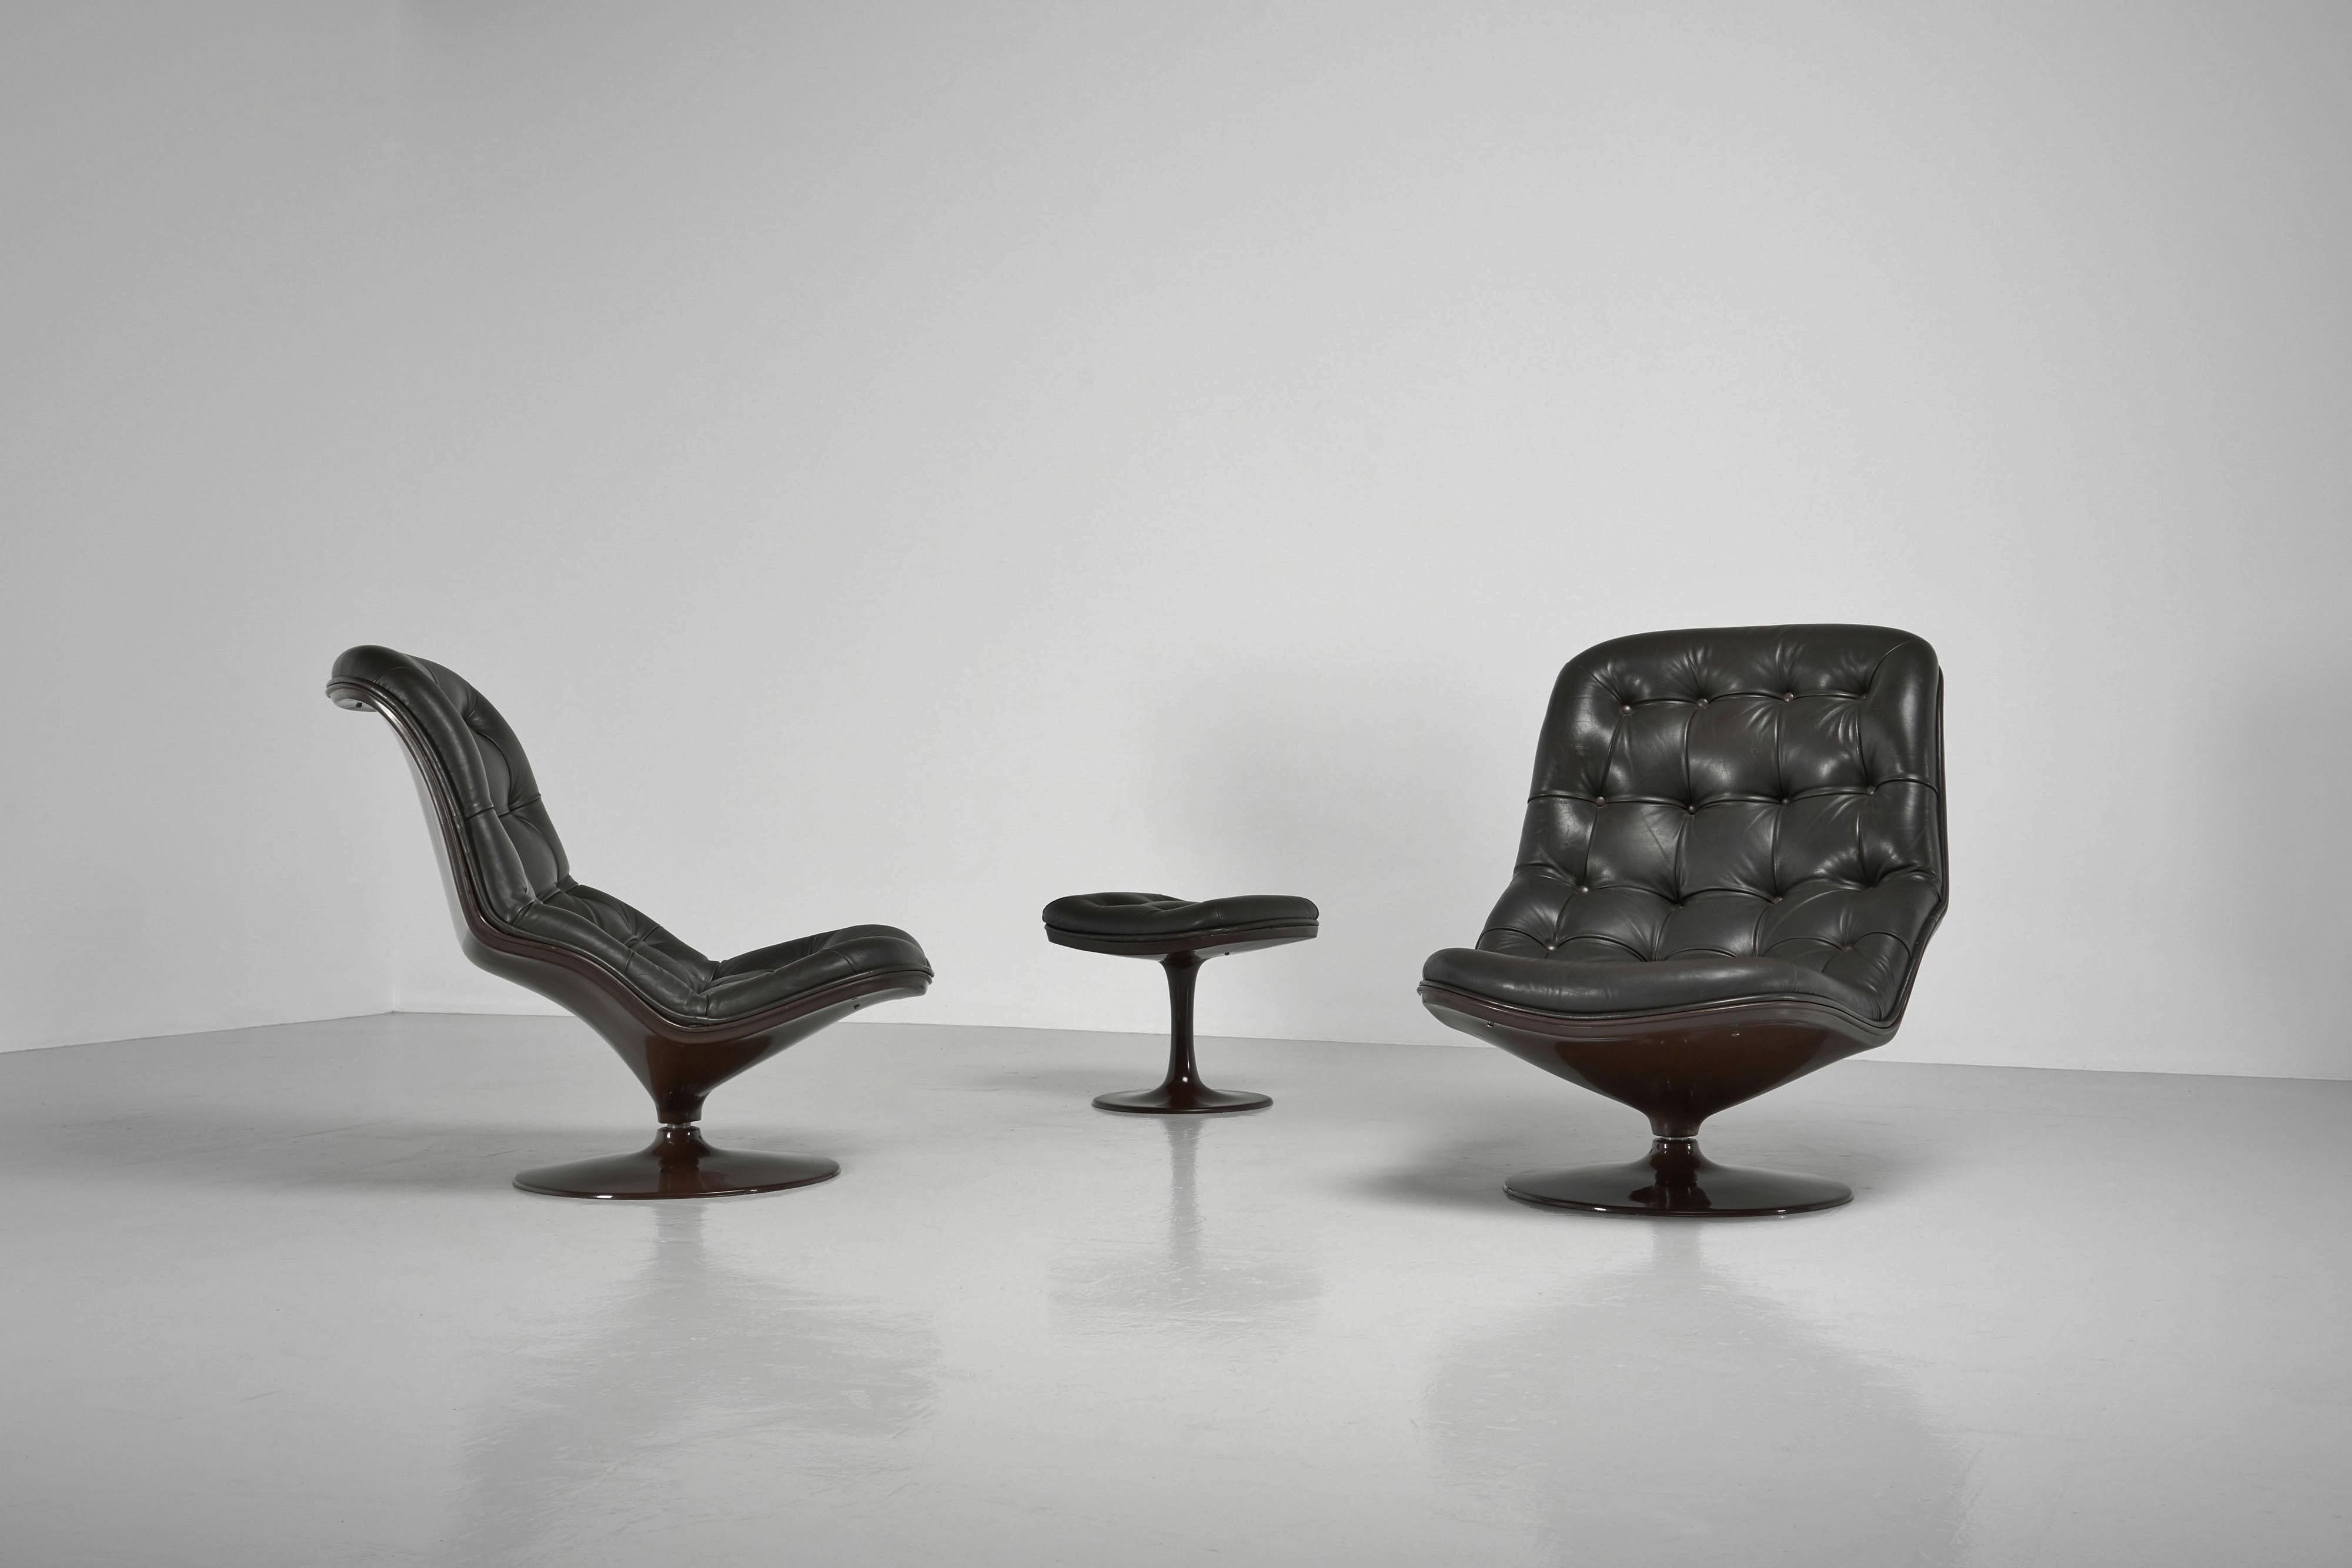 Amazing set of 2 so called ‘Shelby’ lounge chairs designed by Georges Van Rijck and manufactured by Beaufort, Belgium 1970. This is for a set of 2 adjustable lounge chairs and a foot stool, made of chocolate brown fiberglass and dark brown leather